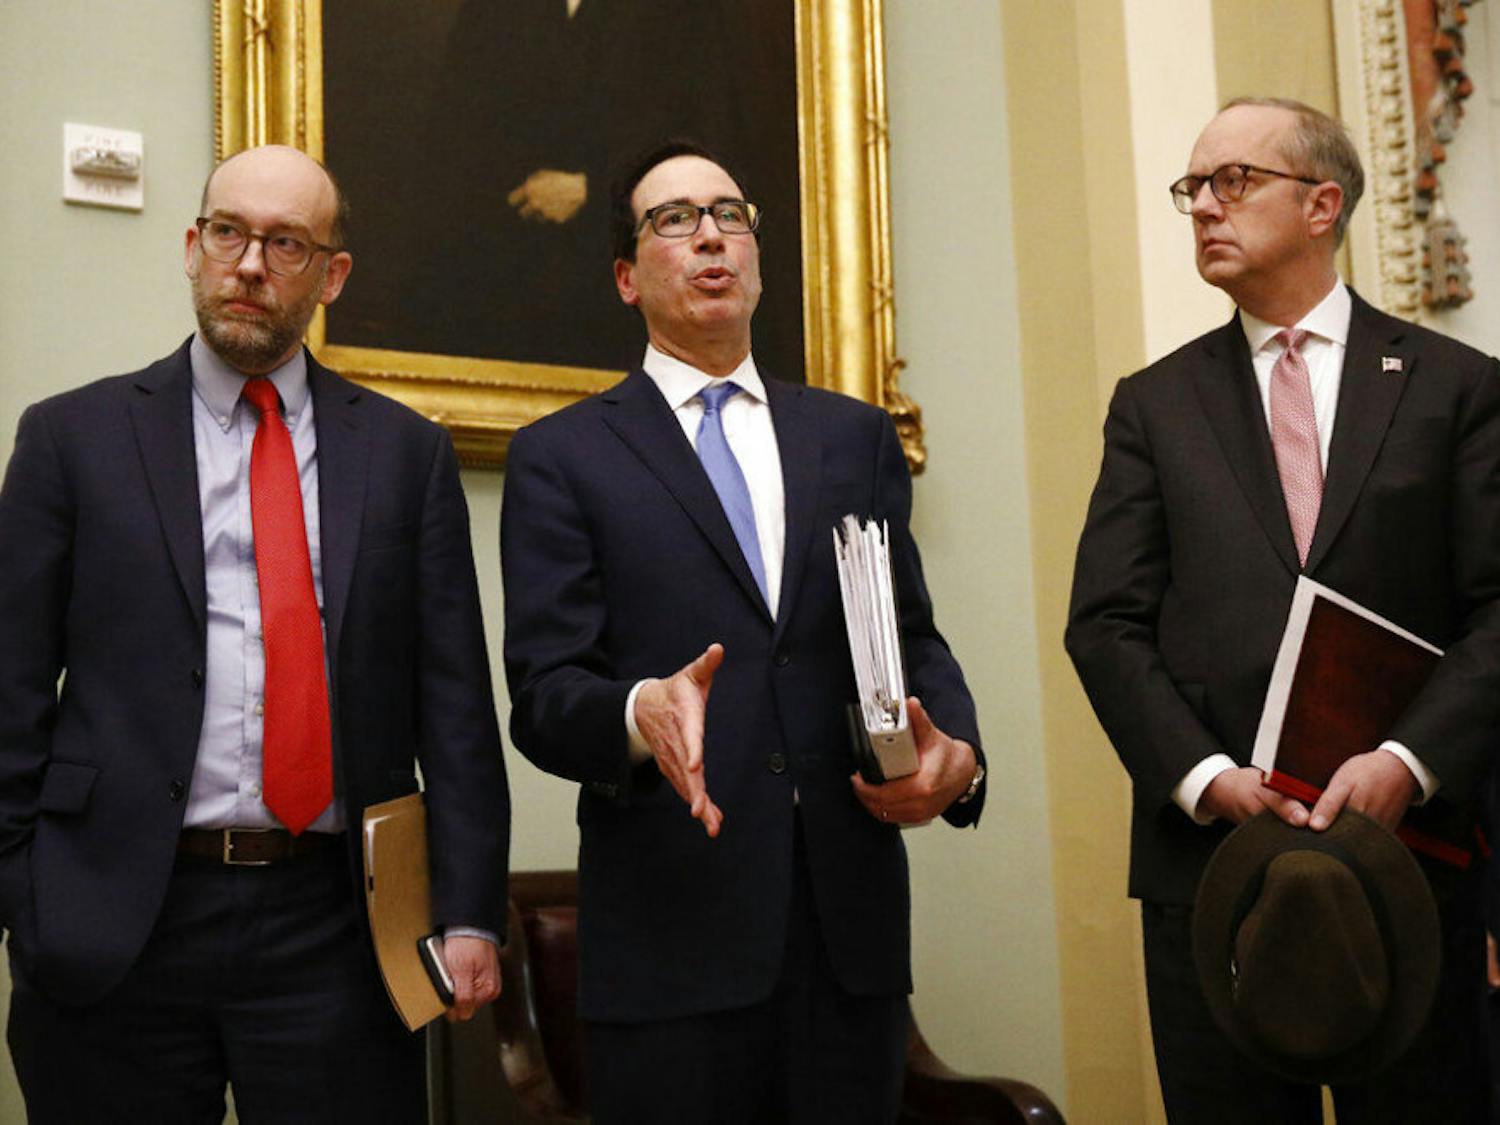 Treasury Secretary Steve Mnuchin, center, speaks with members of the media as he departs a meeting with Senate Republicans on an economic lifeline for Americans affected by the coronavirus outbreak. on Capitol Hill in Washington, Monday, March 16, 2020. (AP Photo/Patrick Semansky)